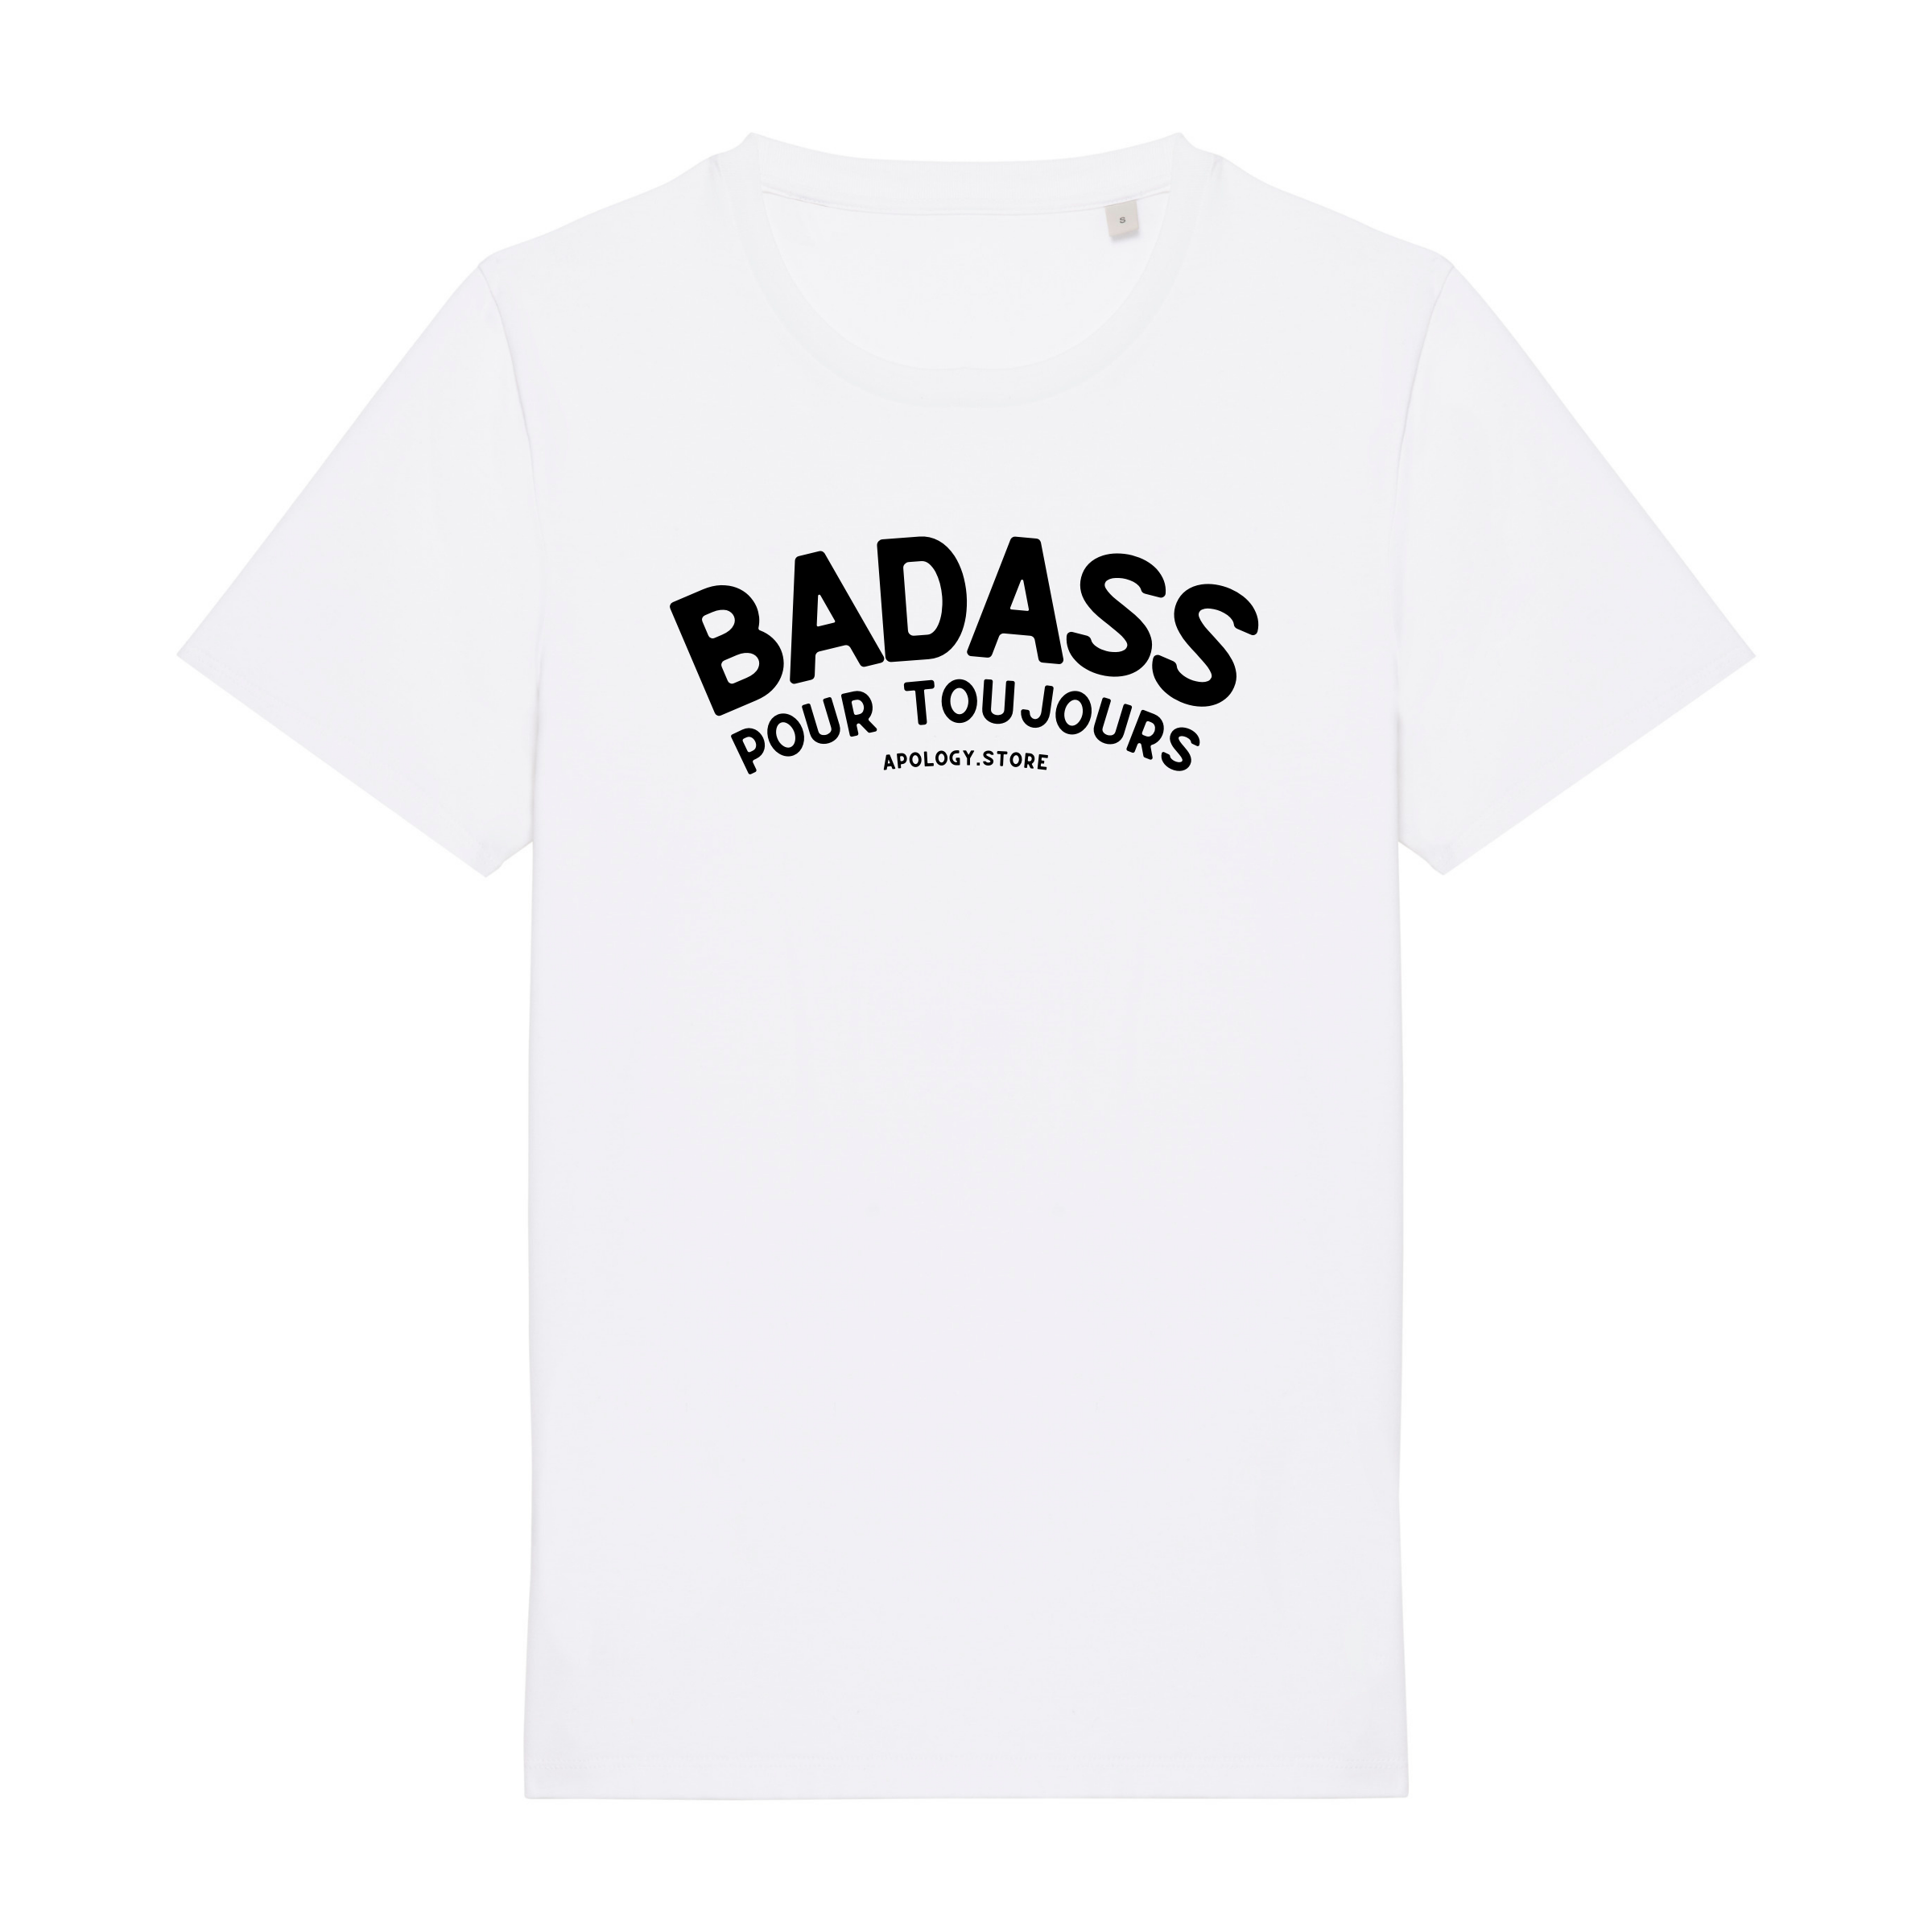 Badass Forever T-shirt - organic cotton - Made in Portugal